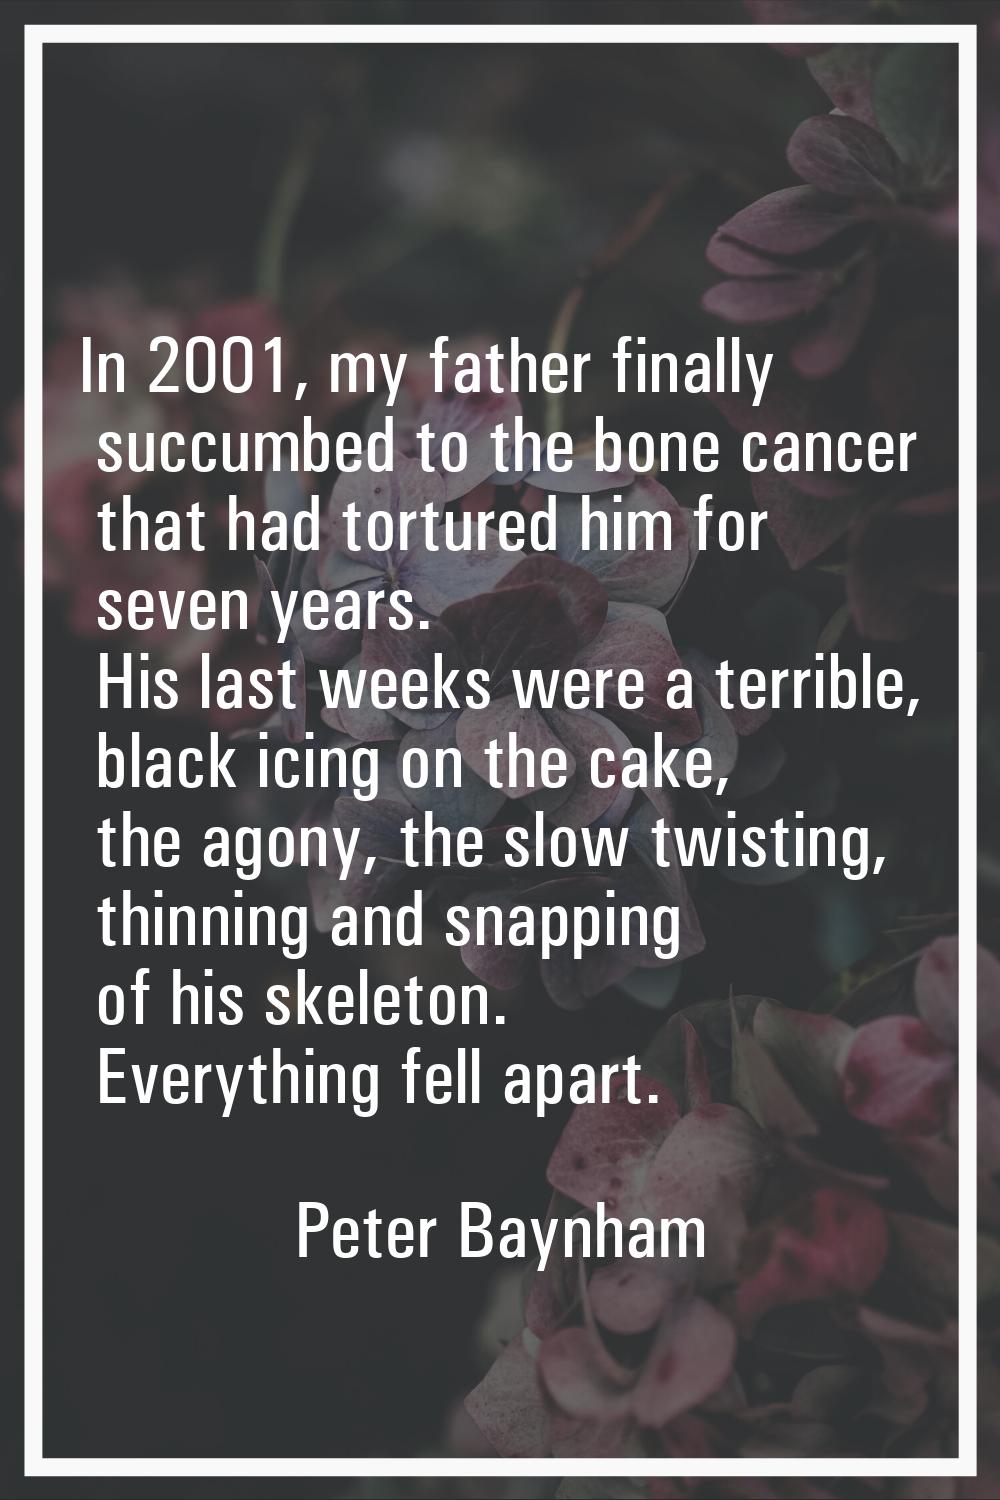 In 2001, my father finally succumbed to the bone cancer that had tortured him for seven years. His 